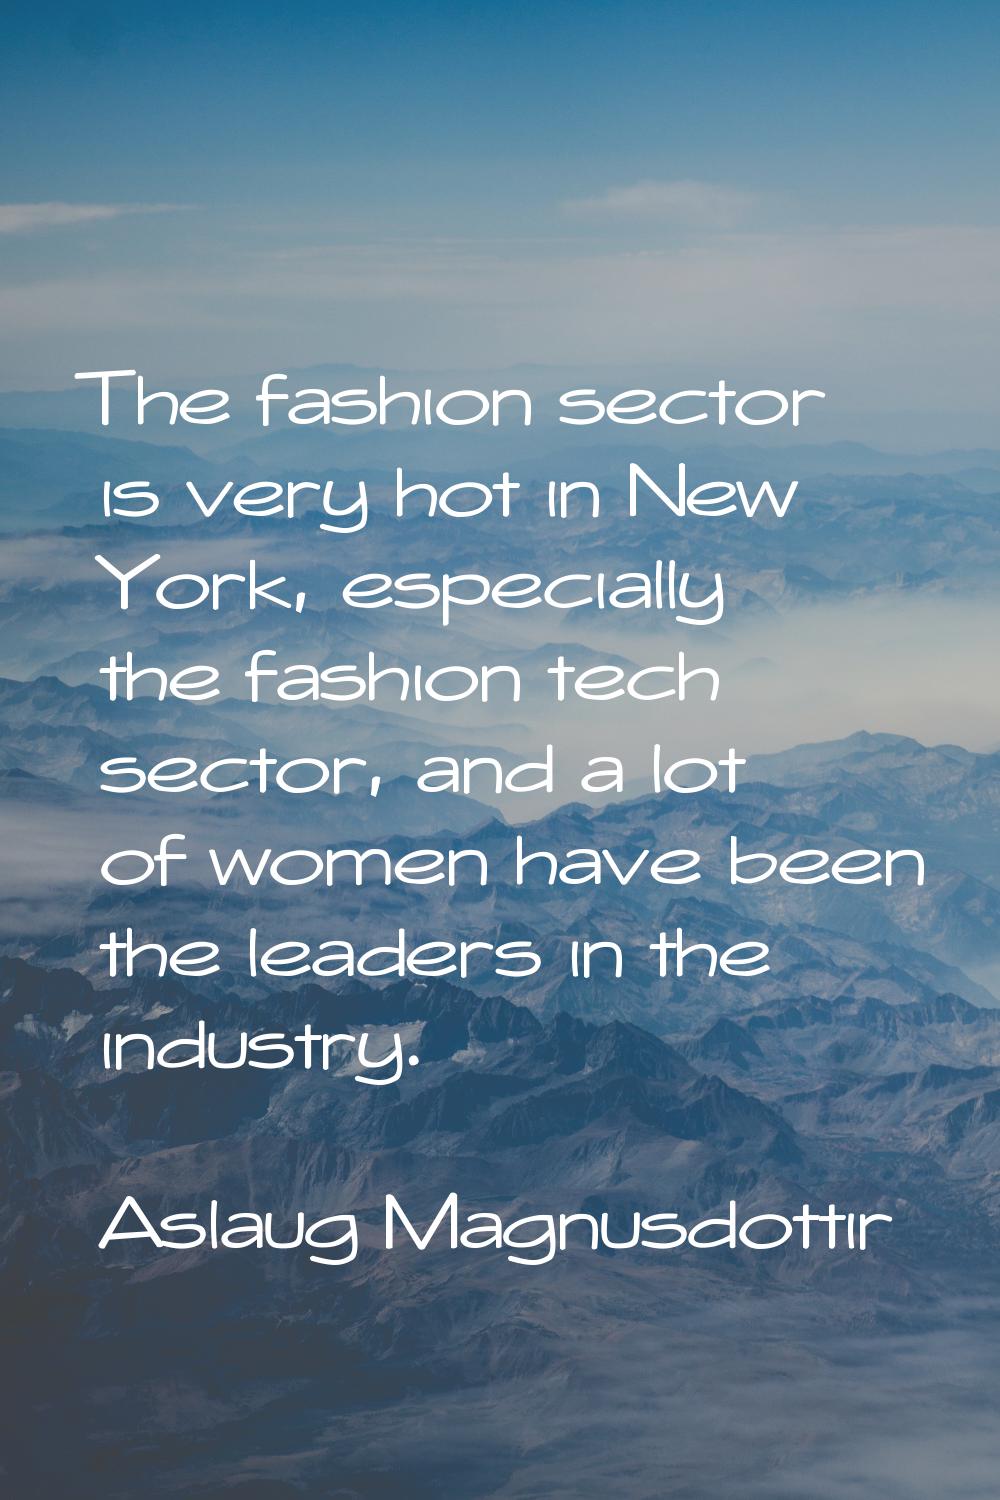 The fashion sector is very hot in New York, especially the fashion tech sector, and a lot of women 